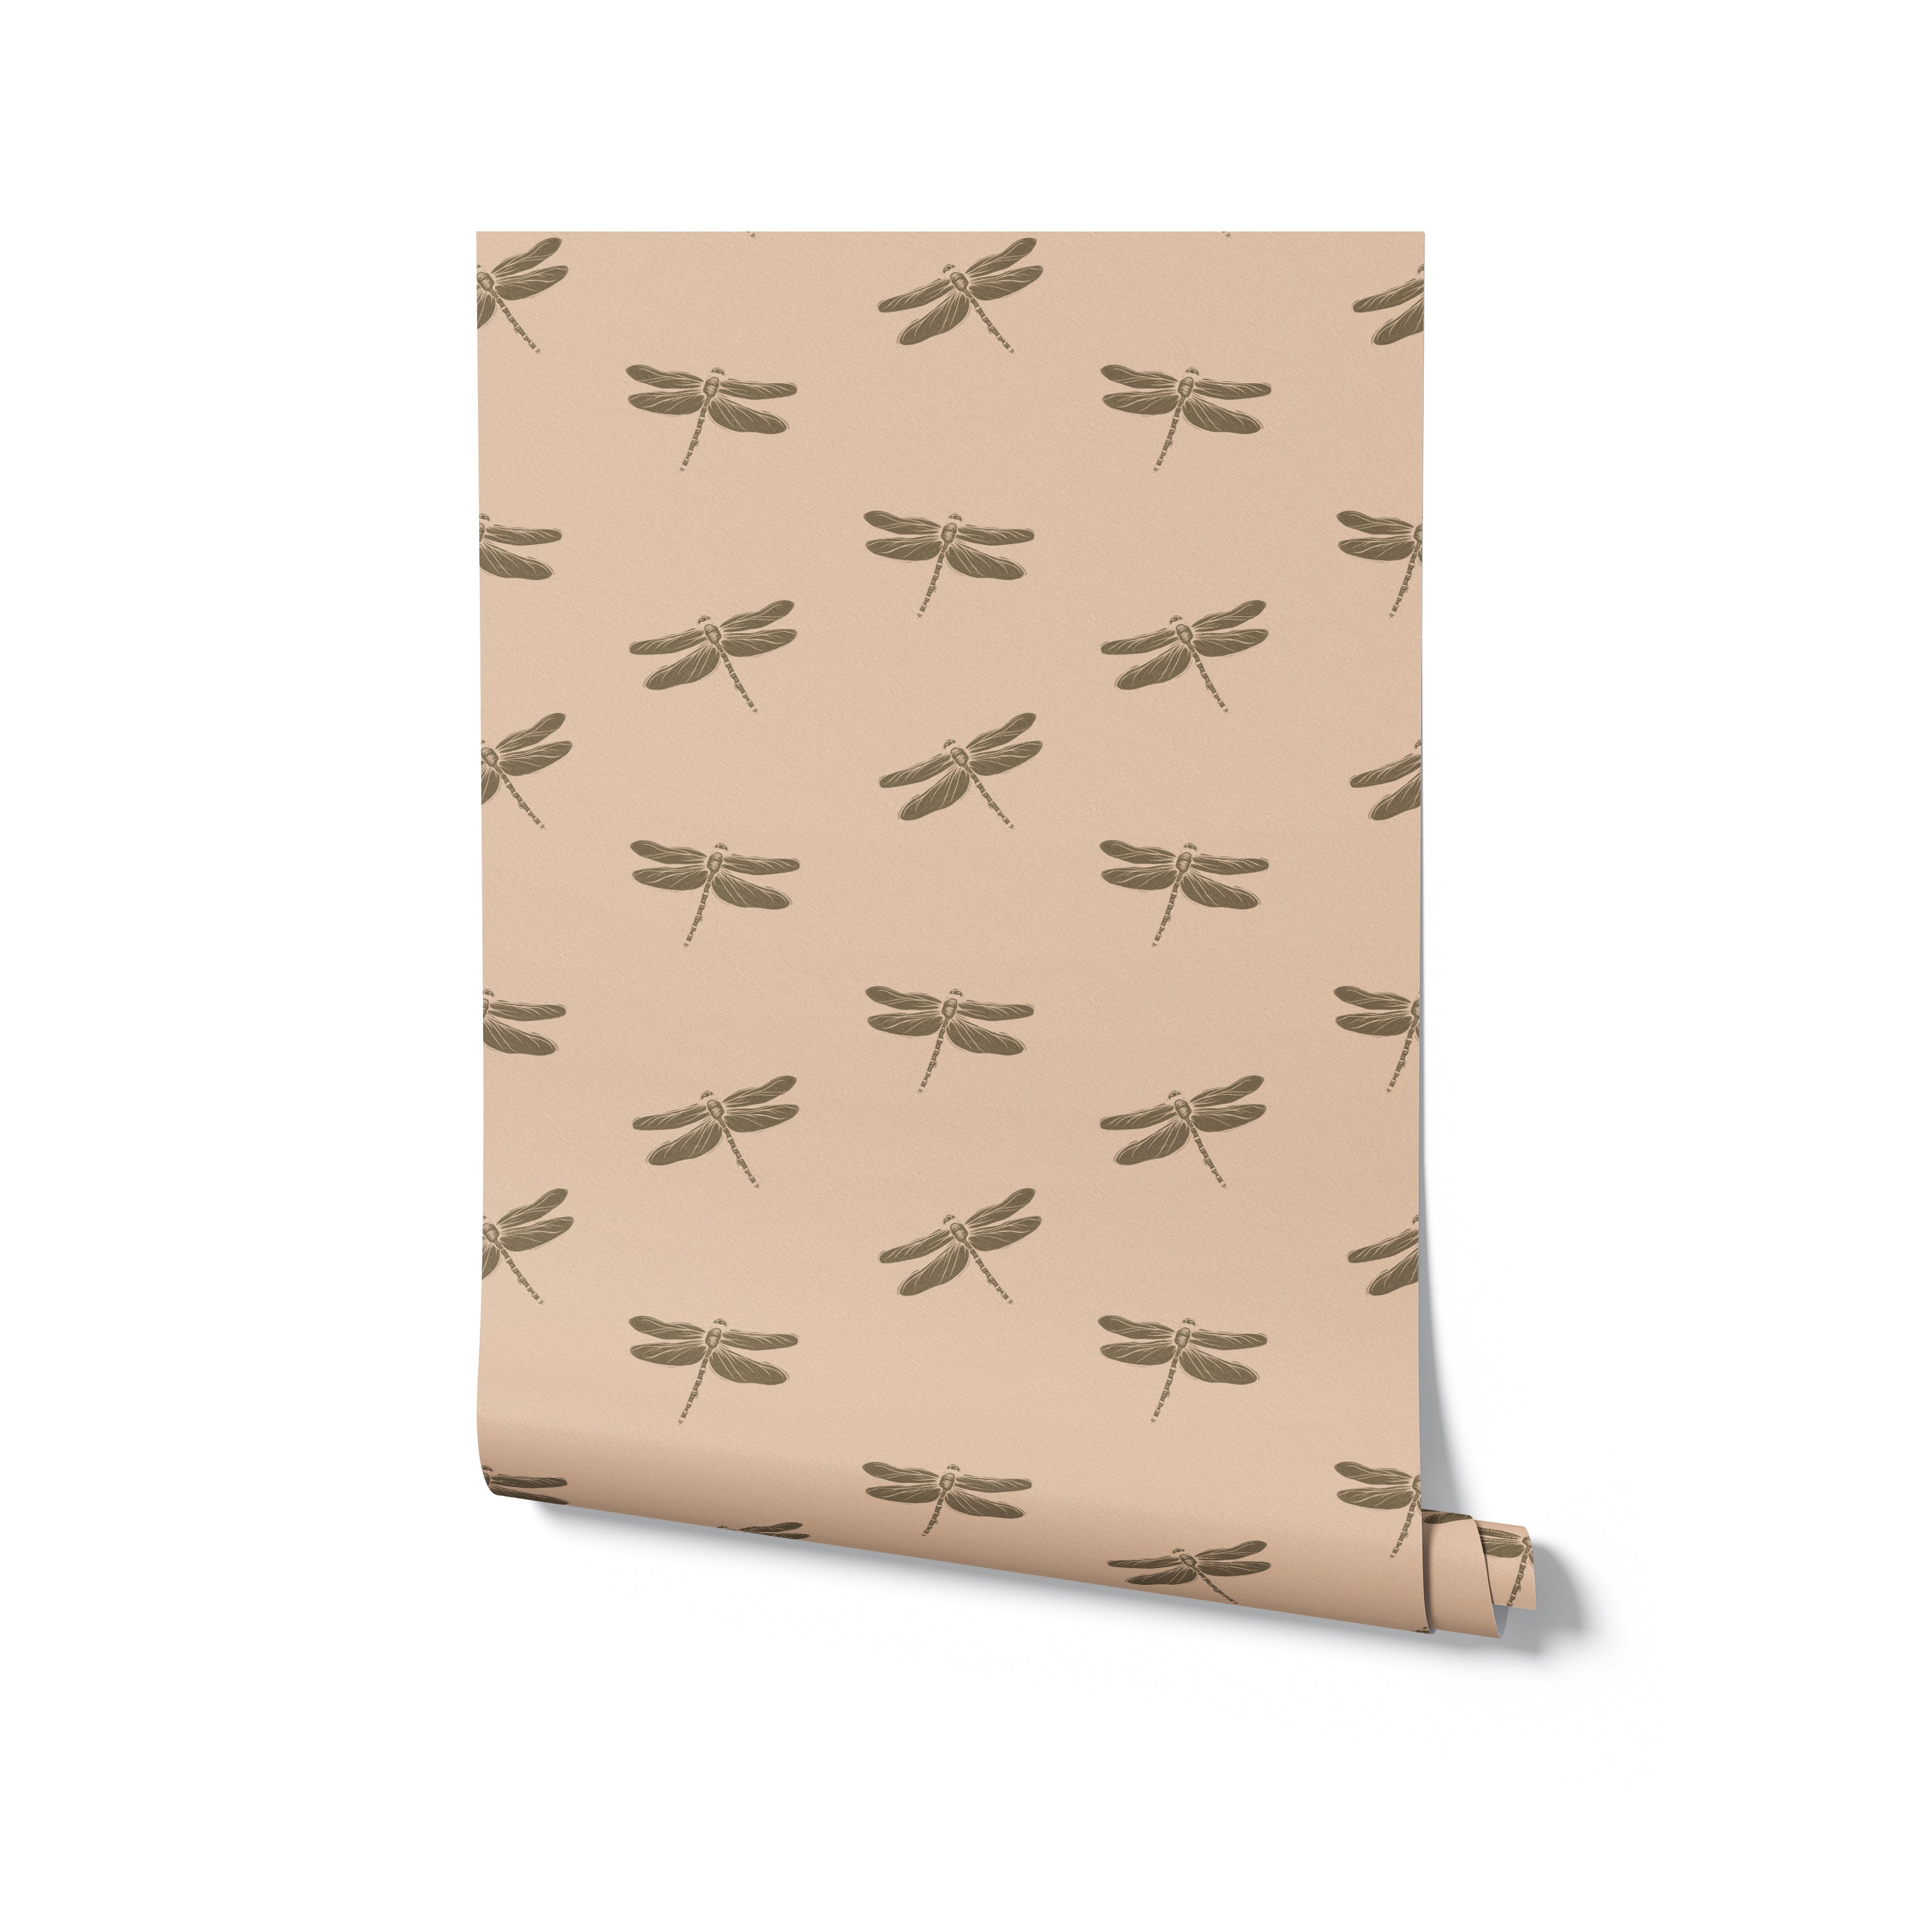 A roll of Autumn Dragonfly wallpaper displayed vertically, showing the serene beauty of dragonflies printed in a repeating pattern on a soft beige background, perfect for creating a tranquil home atmosphere.